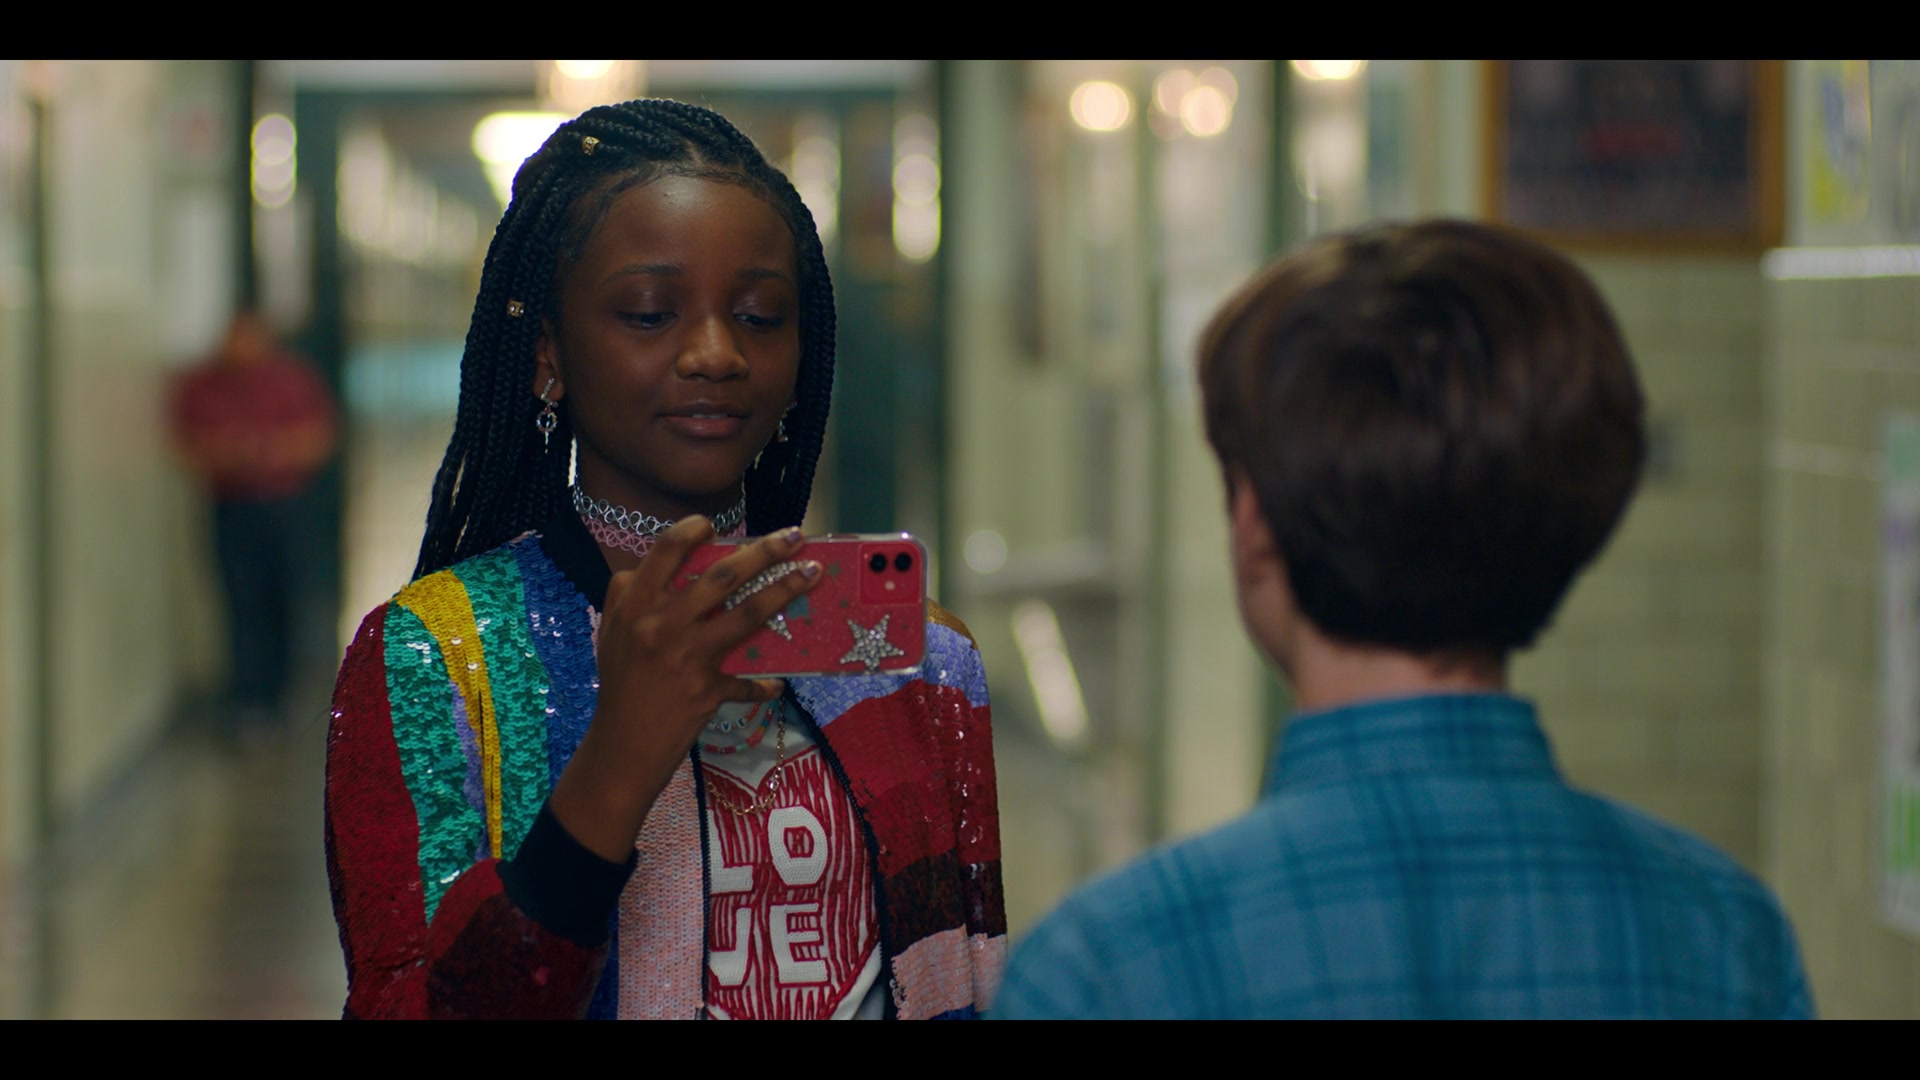 On April 2, 2022, I analyzed a Movie and spotted product placement: Apple i...